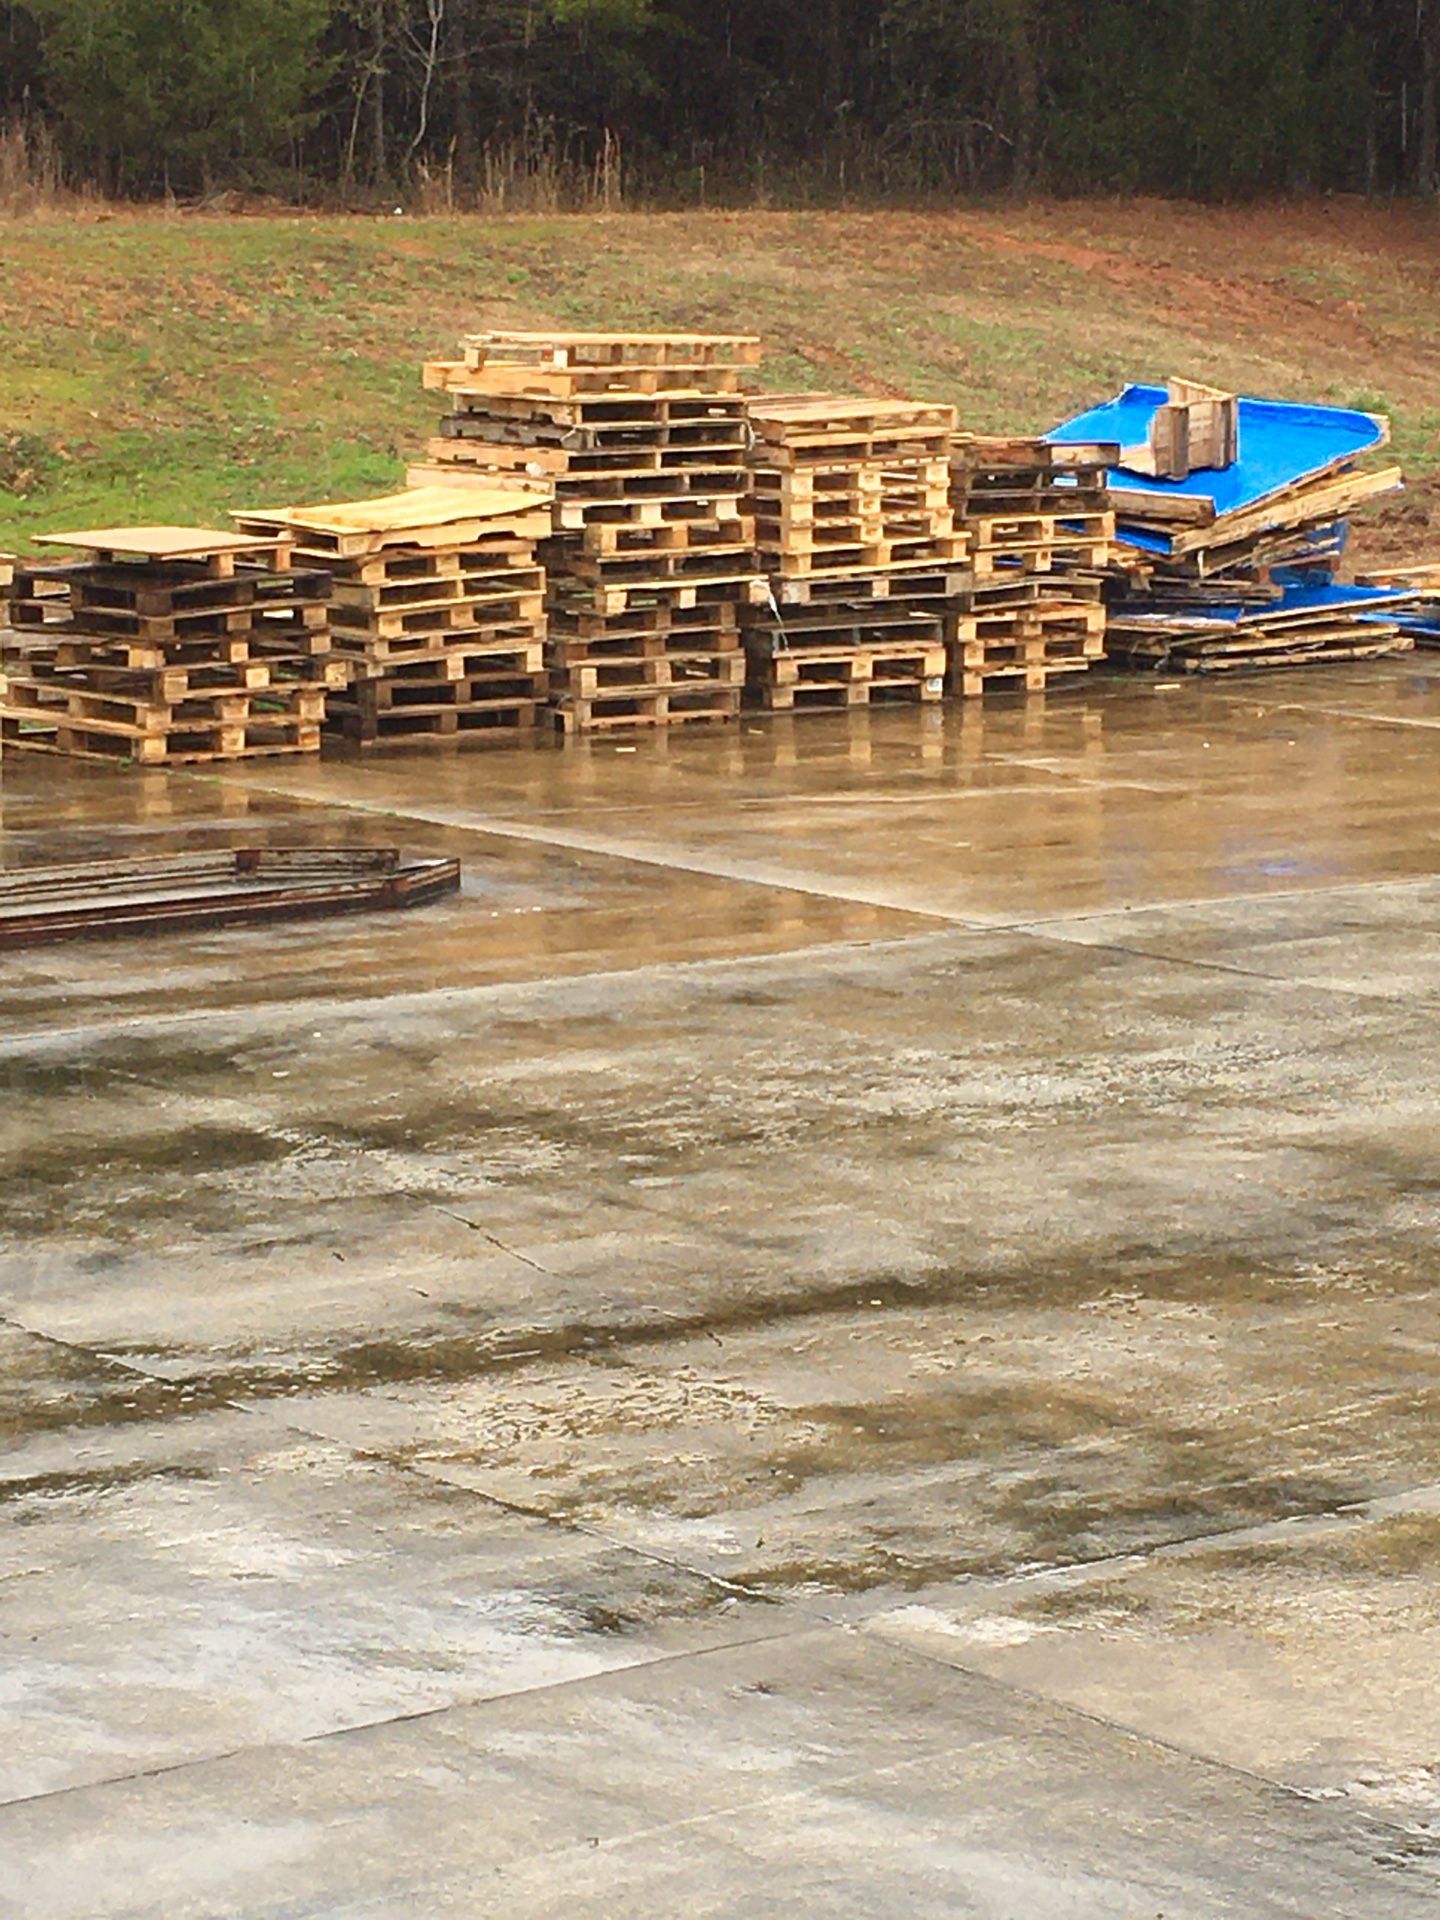 Project or fire wood (block pallets)